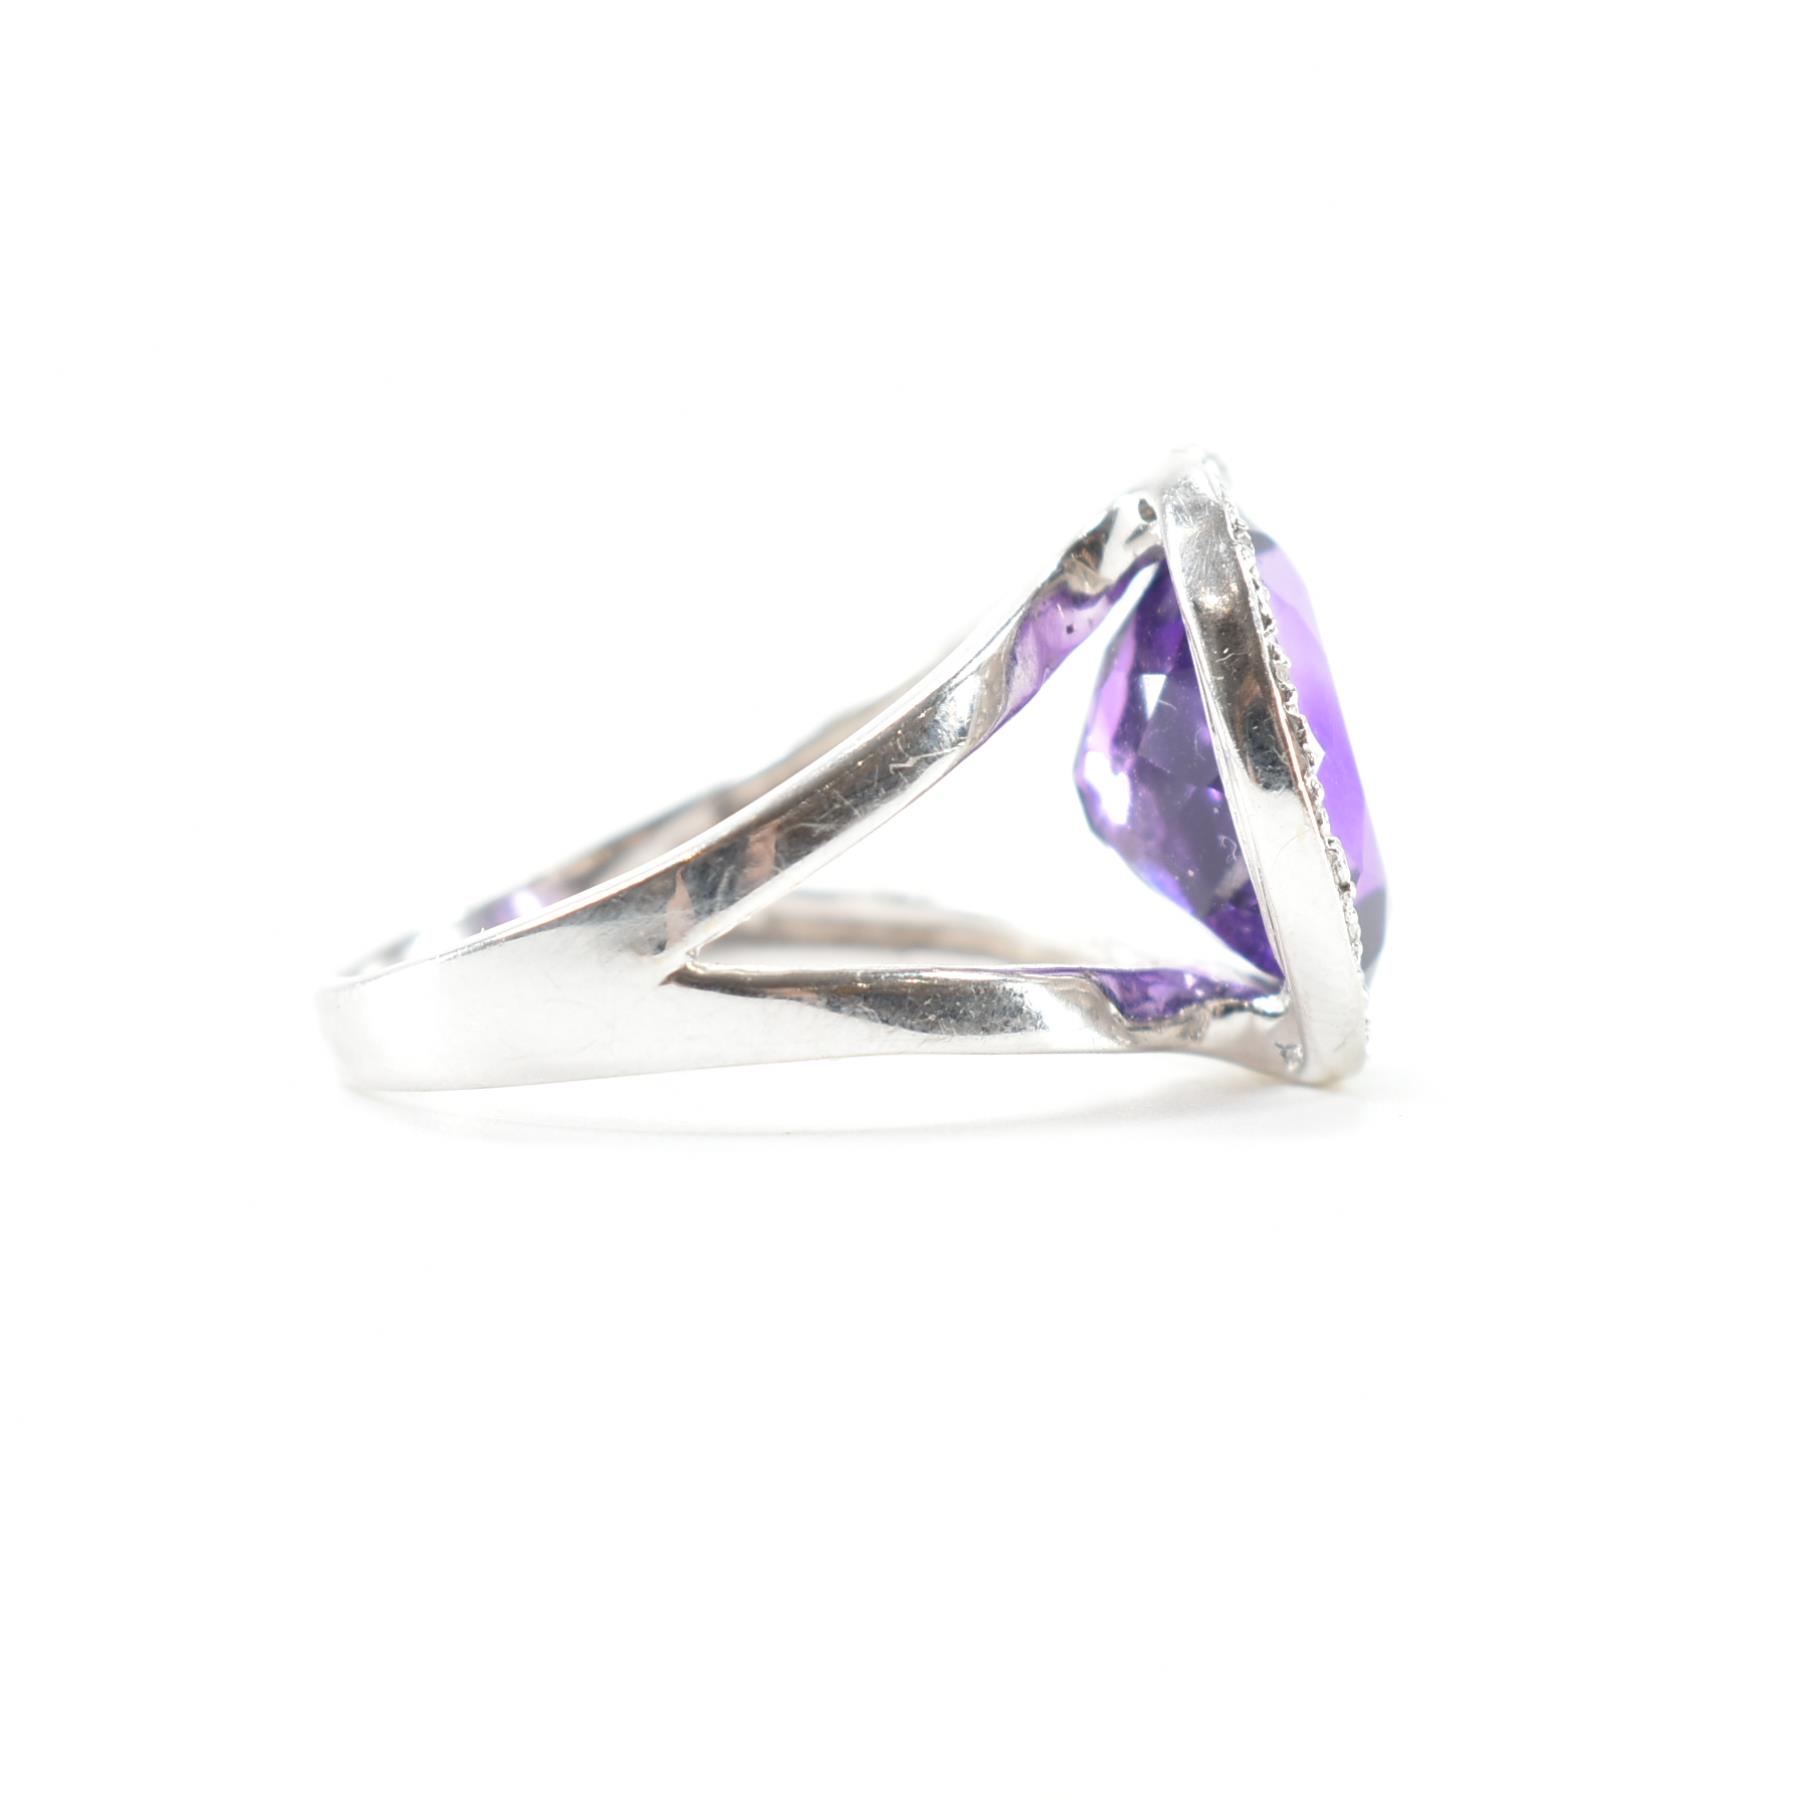 WITHDRAWN - FRENCH 18CT WHITE GOLD AMETHYST & DIAMOND COCKTAIL RING - Image 5 of 8